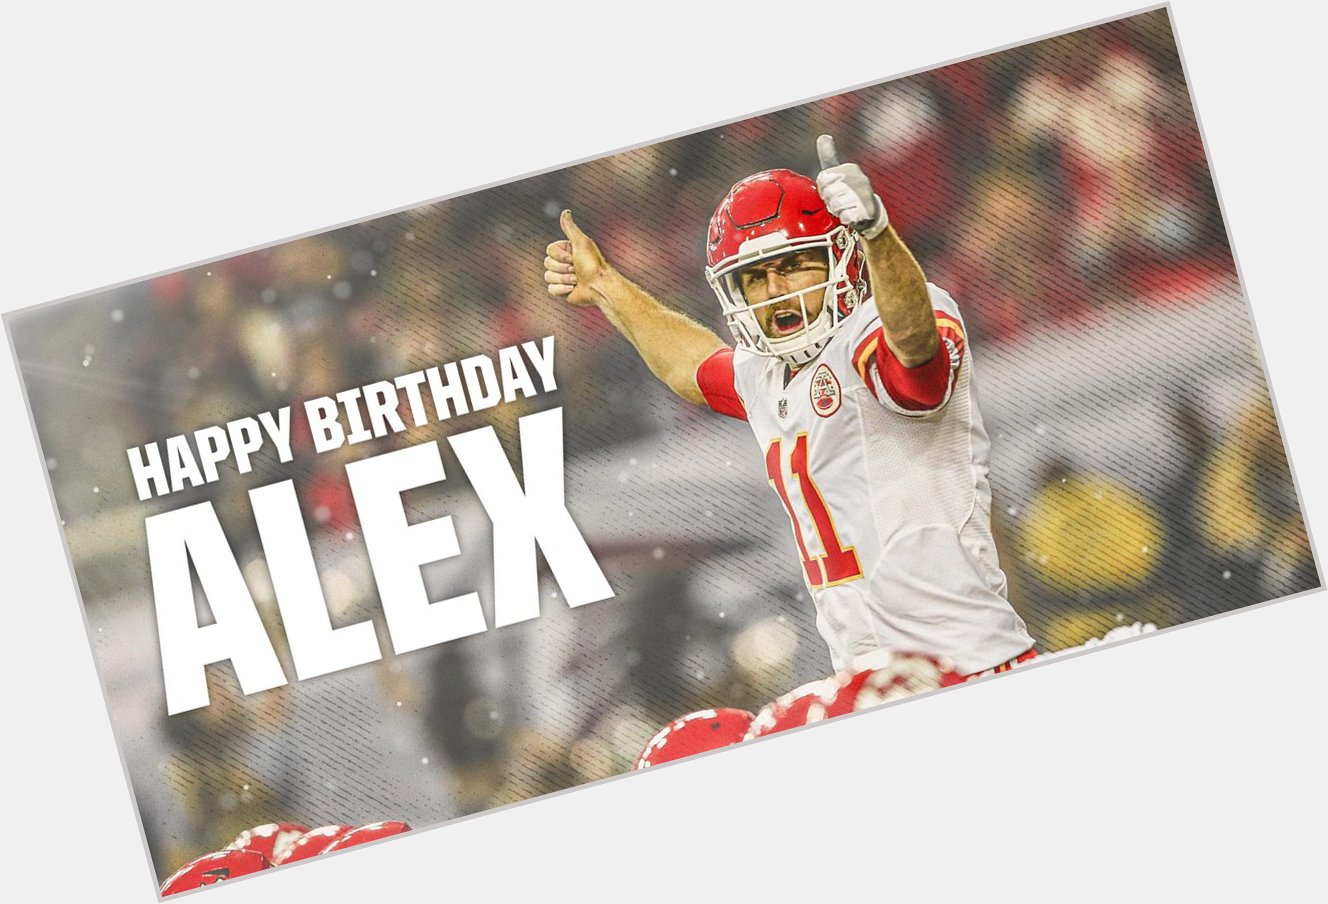 Join us in wishing a happy birthday to Alex Smith!   